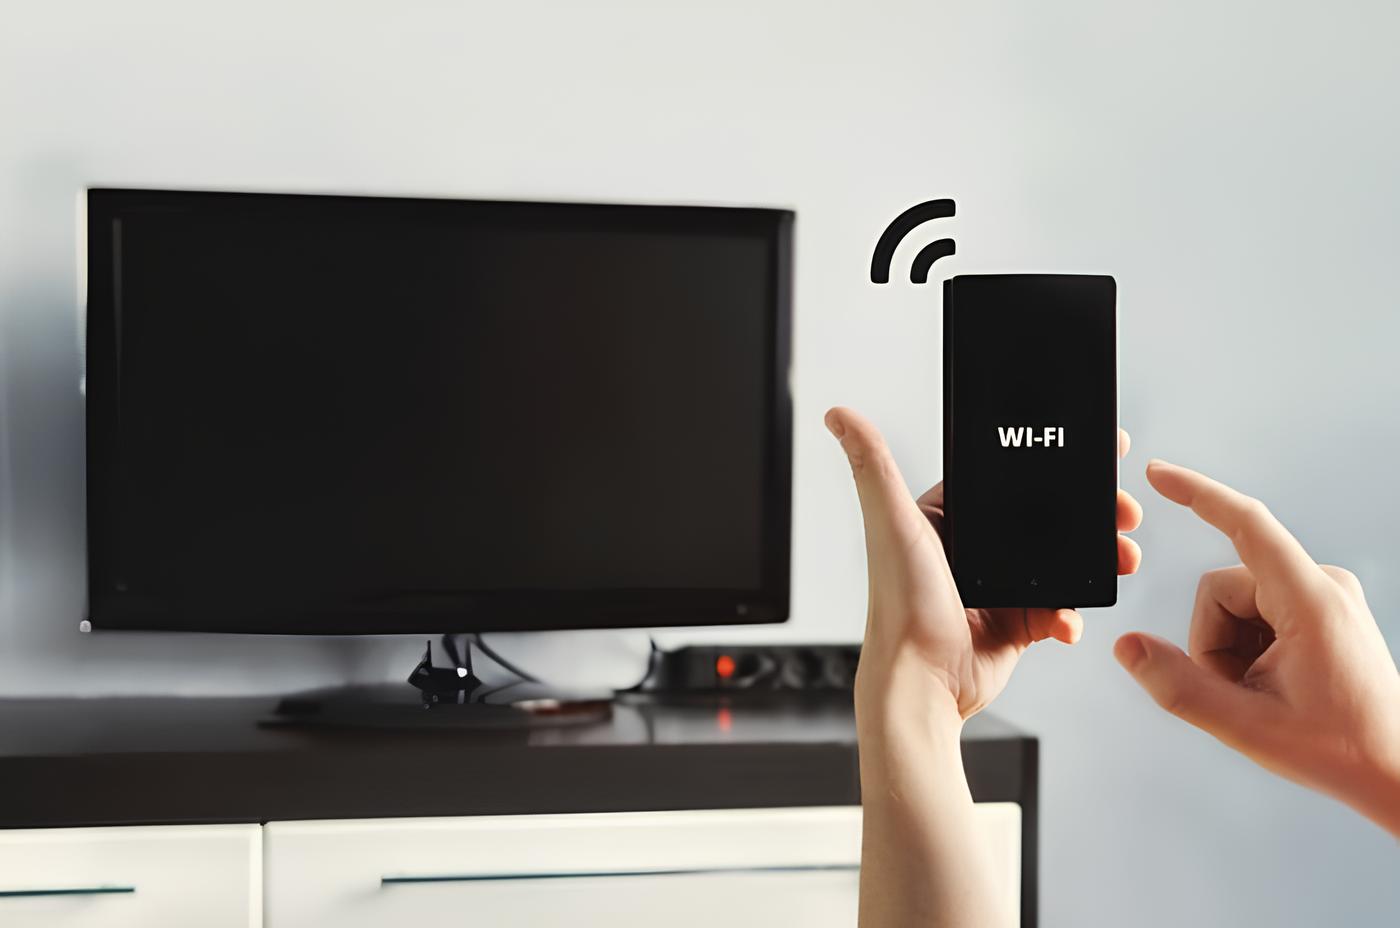 Connecting LG Smart TV To Mobile Hotspot: Setup Guide